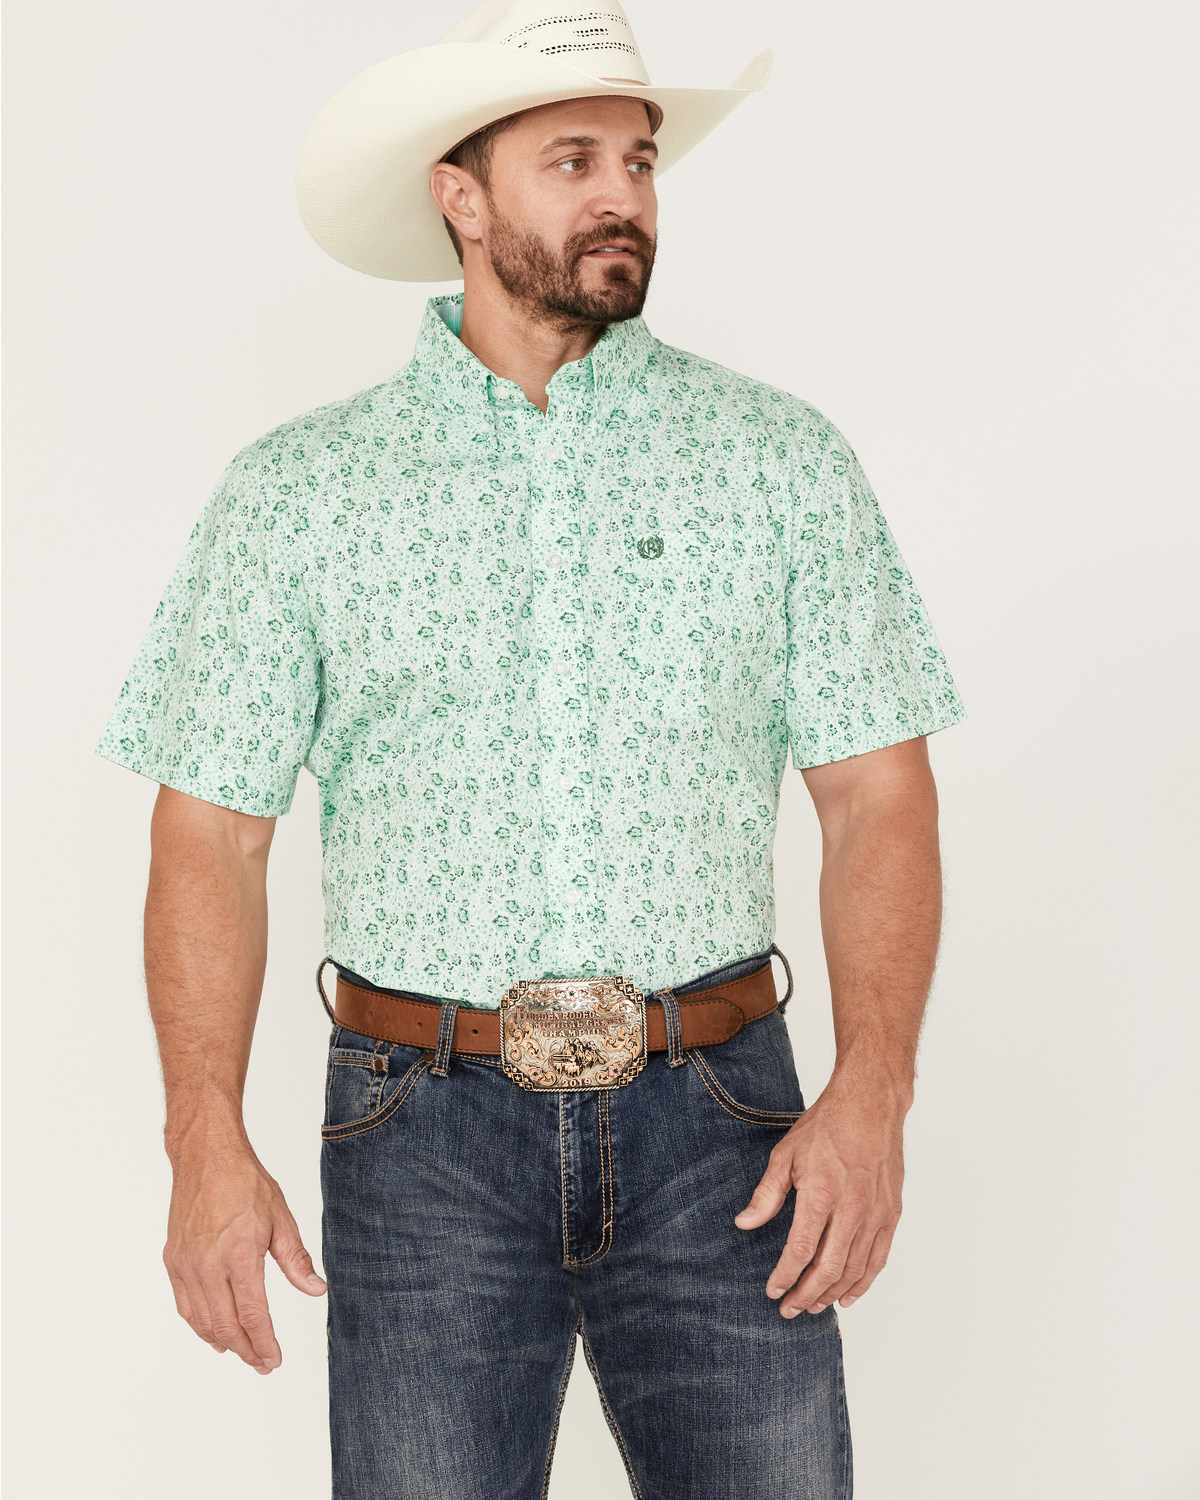 Panhandle Select Men's Allover Floral Print Short Sleeve Button Down Western Shirt